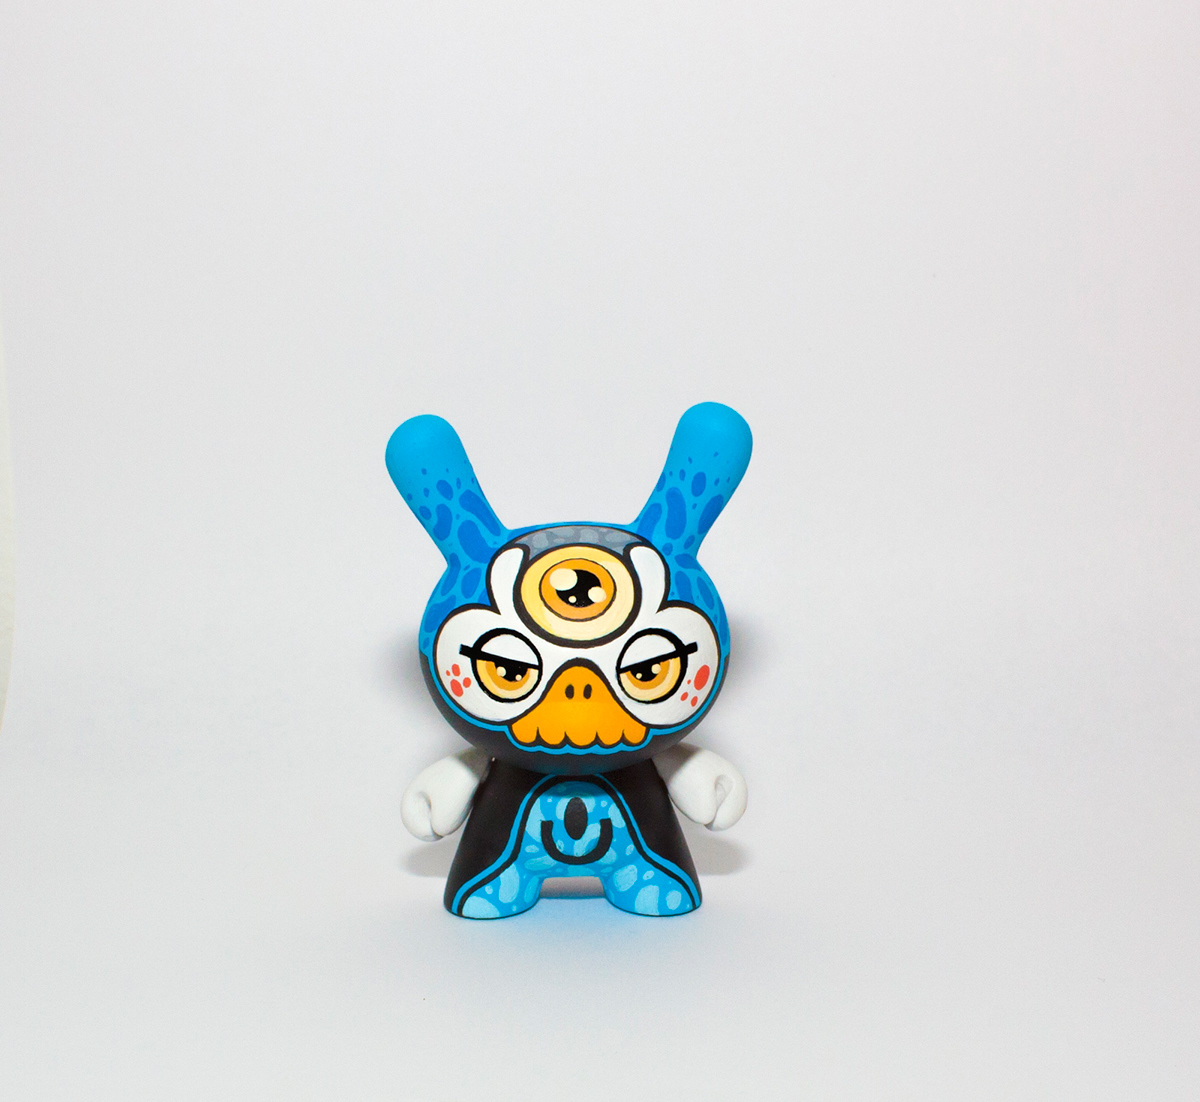 Wuzone Custom vinyltoy Dunny Munny Kidrobot handpainted DIY geek vinyl toy collectible commission colors duck